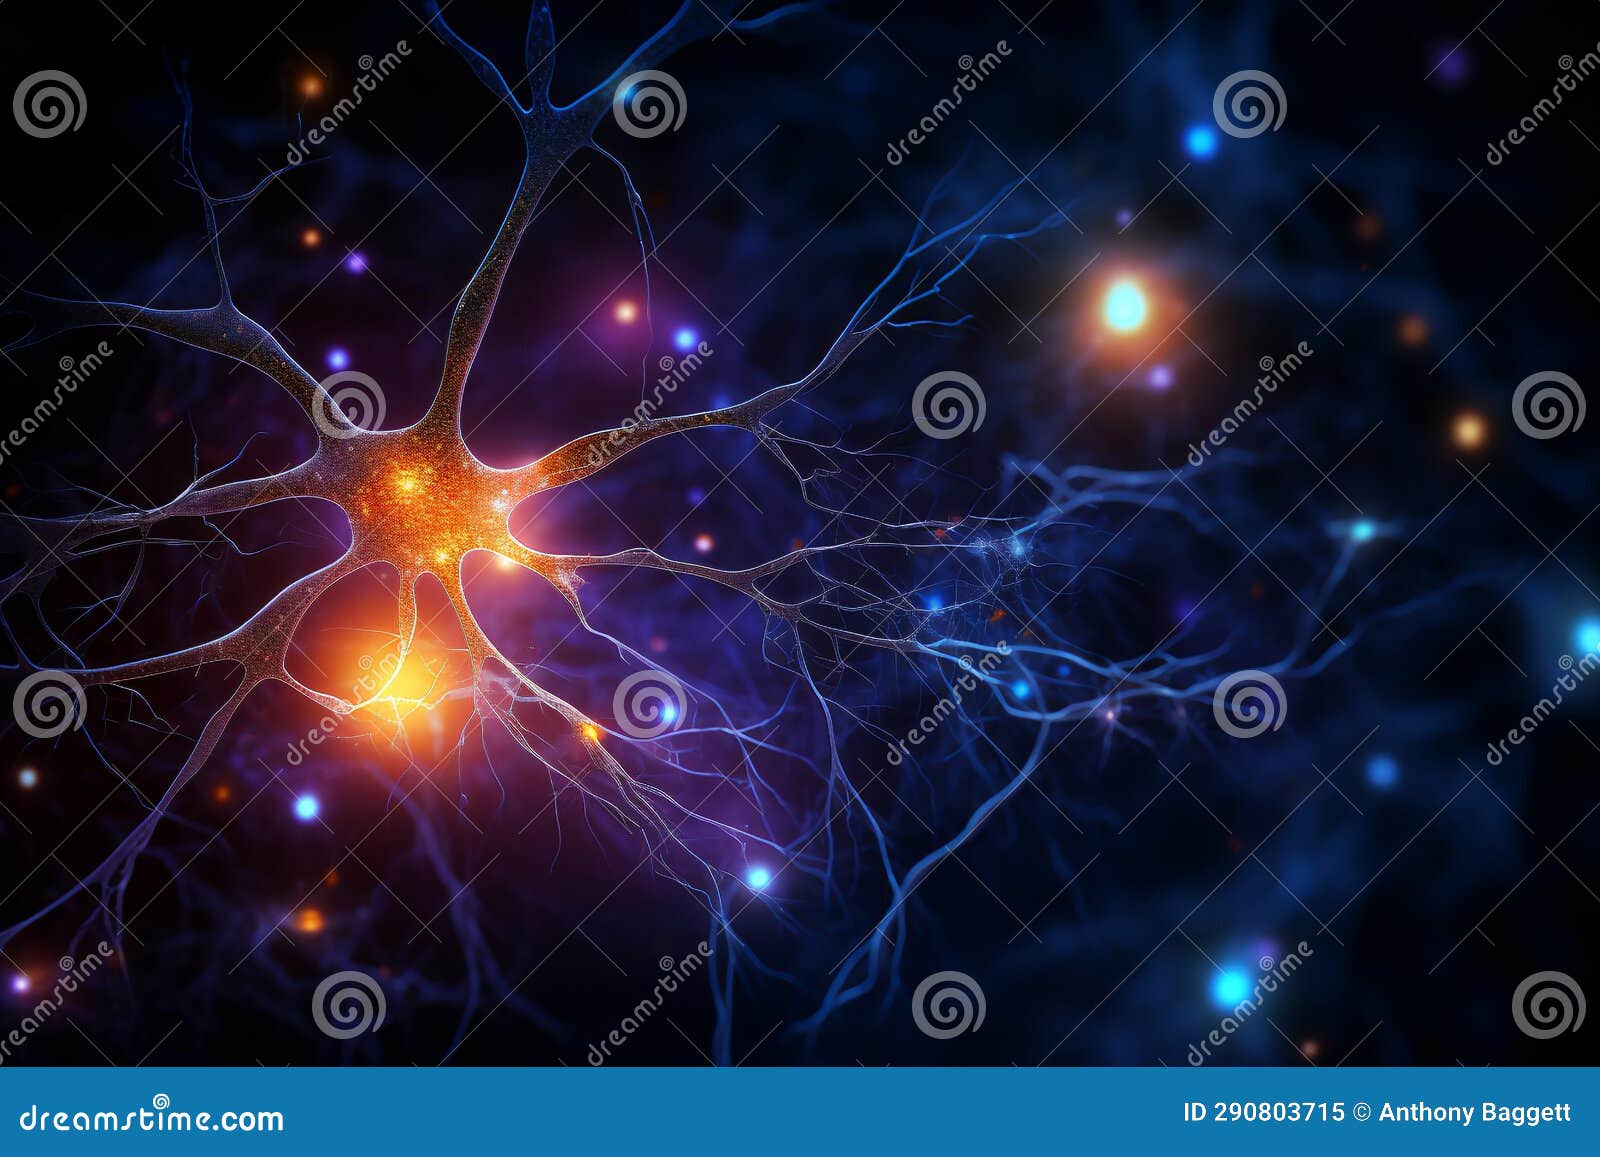 brain neurons are cells that transmit electrical signals